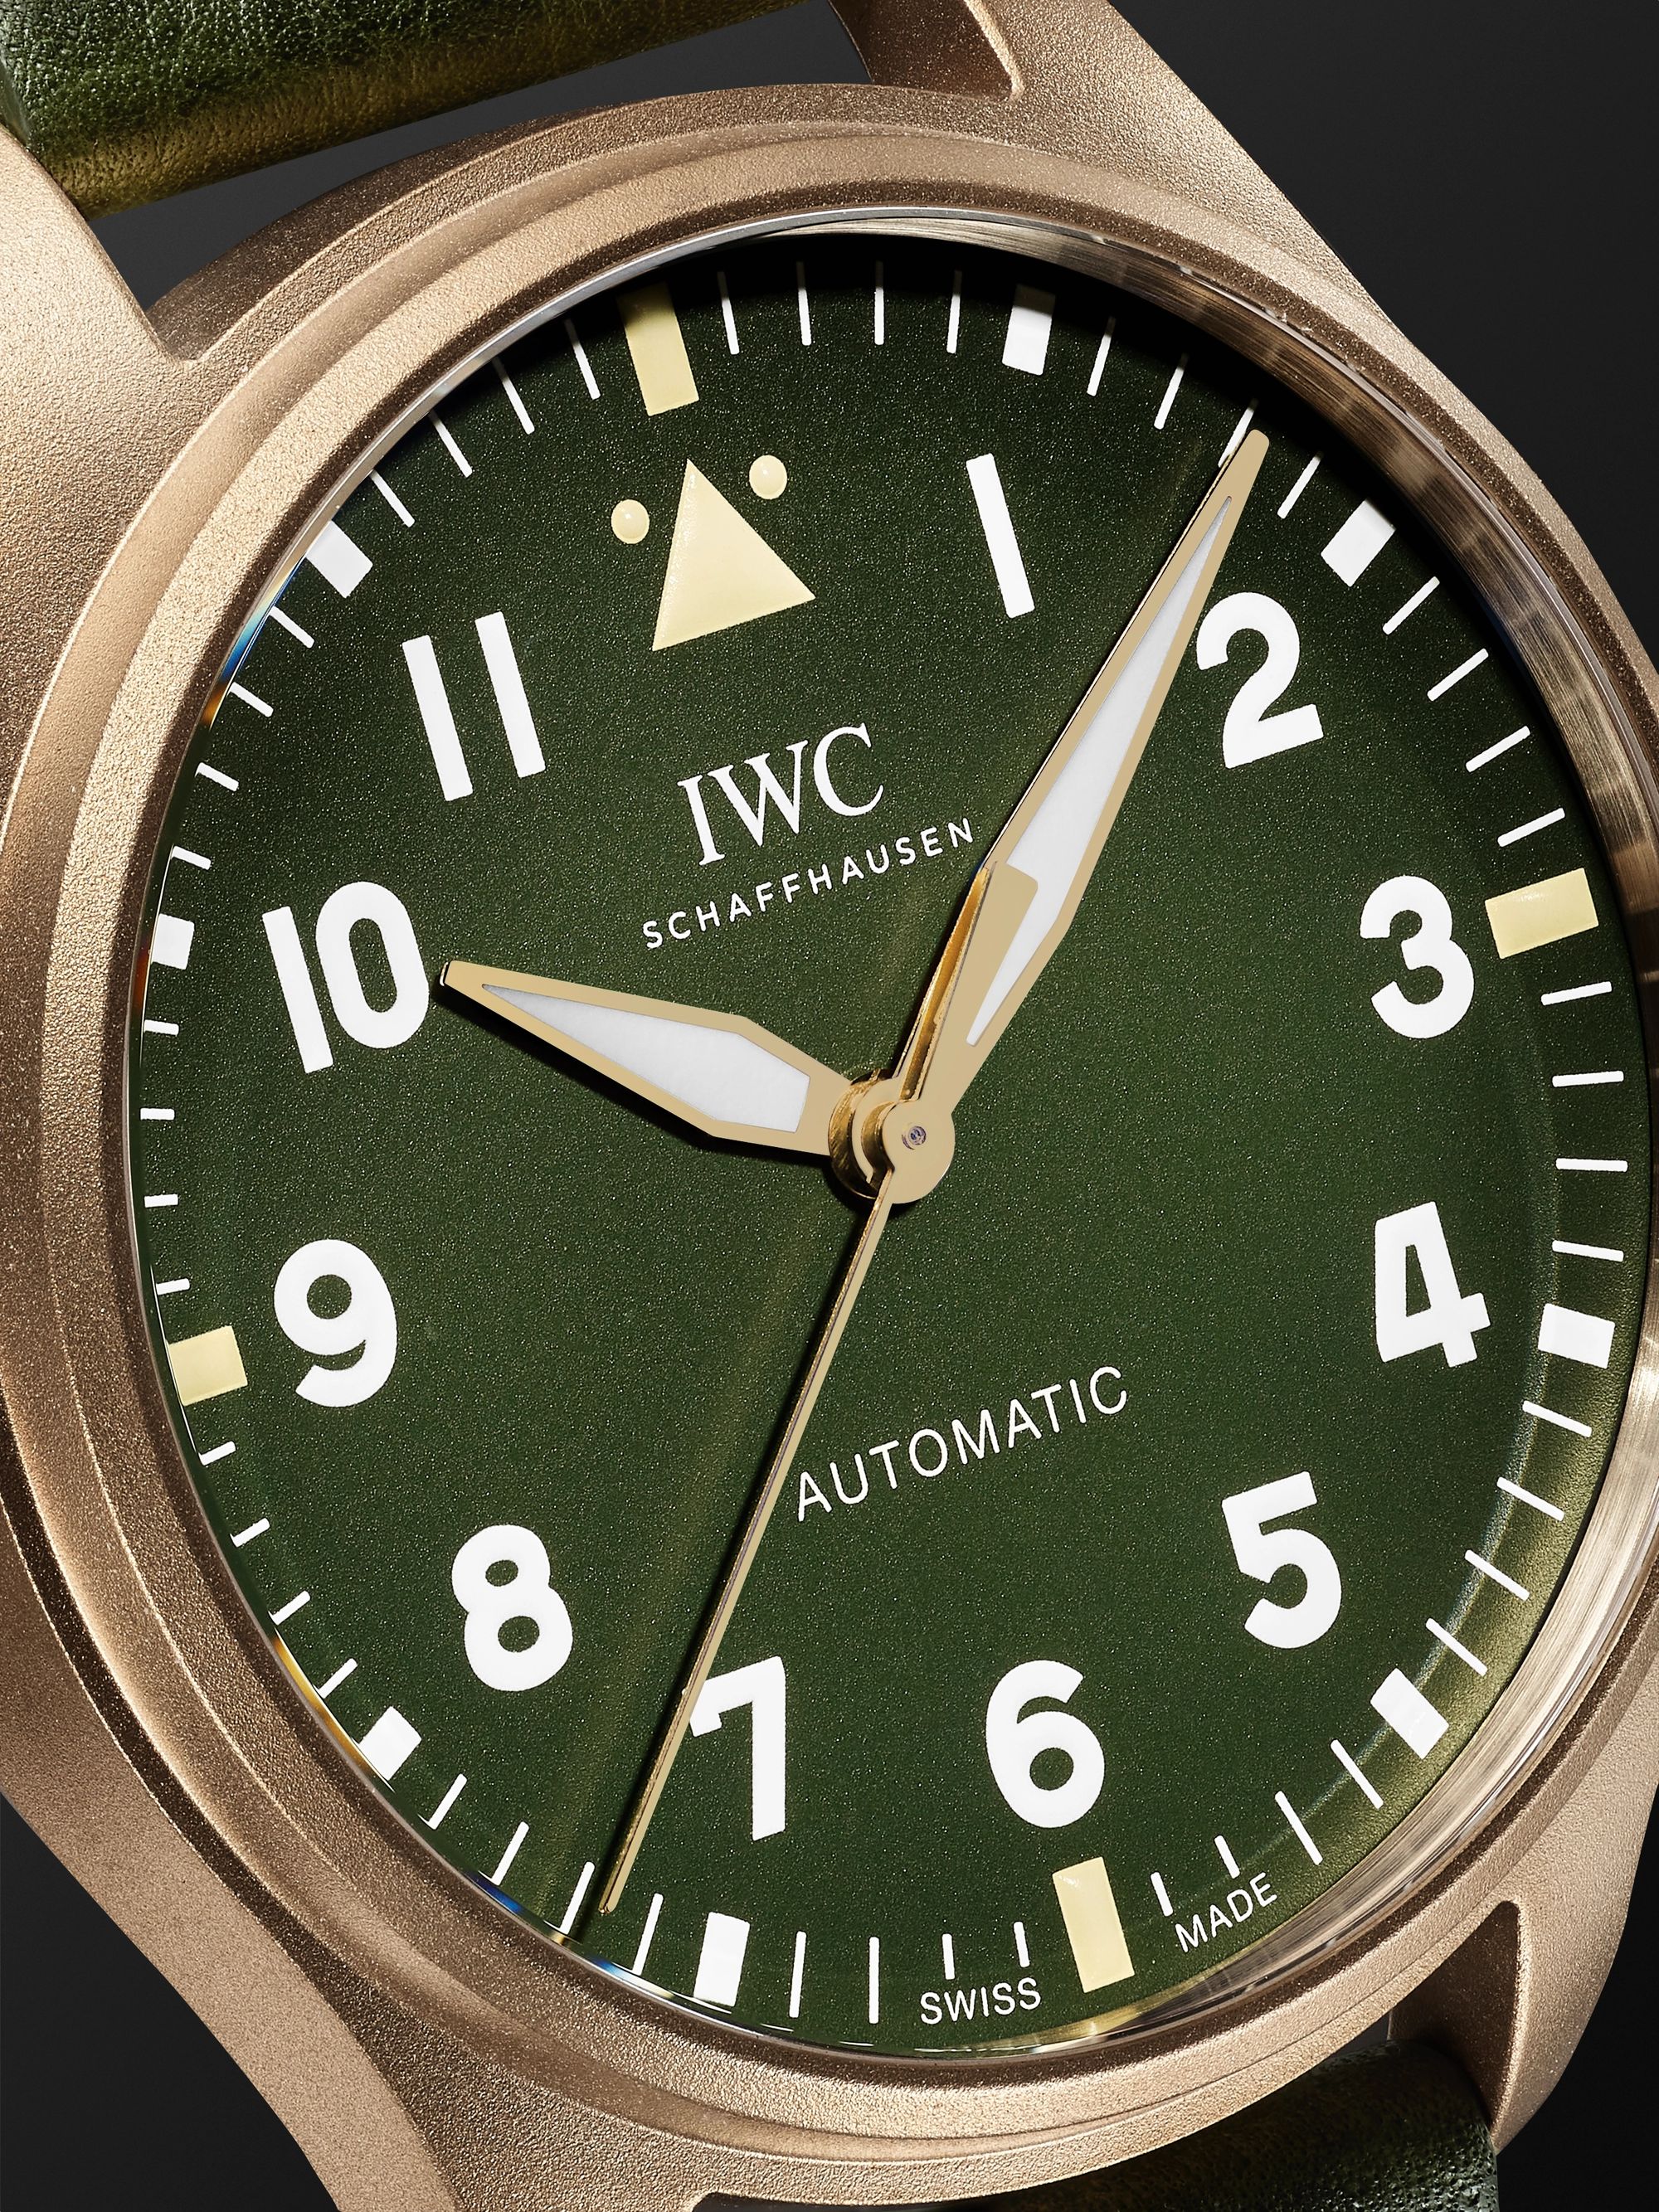 IWC SCHAFFHAUSEN Big Pilot's Spitfire Automatic 43mm Bronze and Leather Watch, Ref. No. IW329702